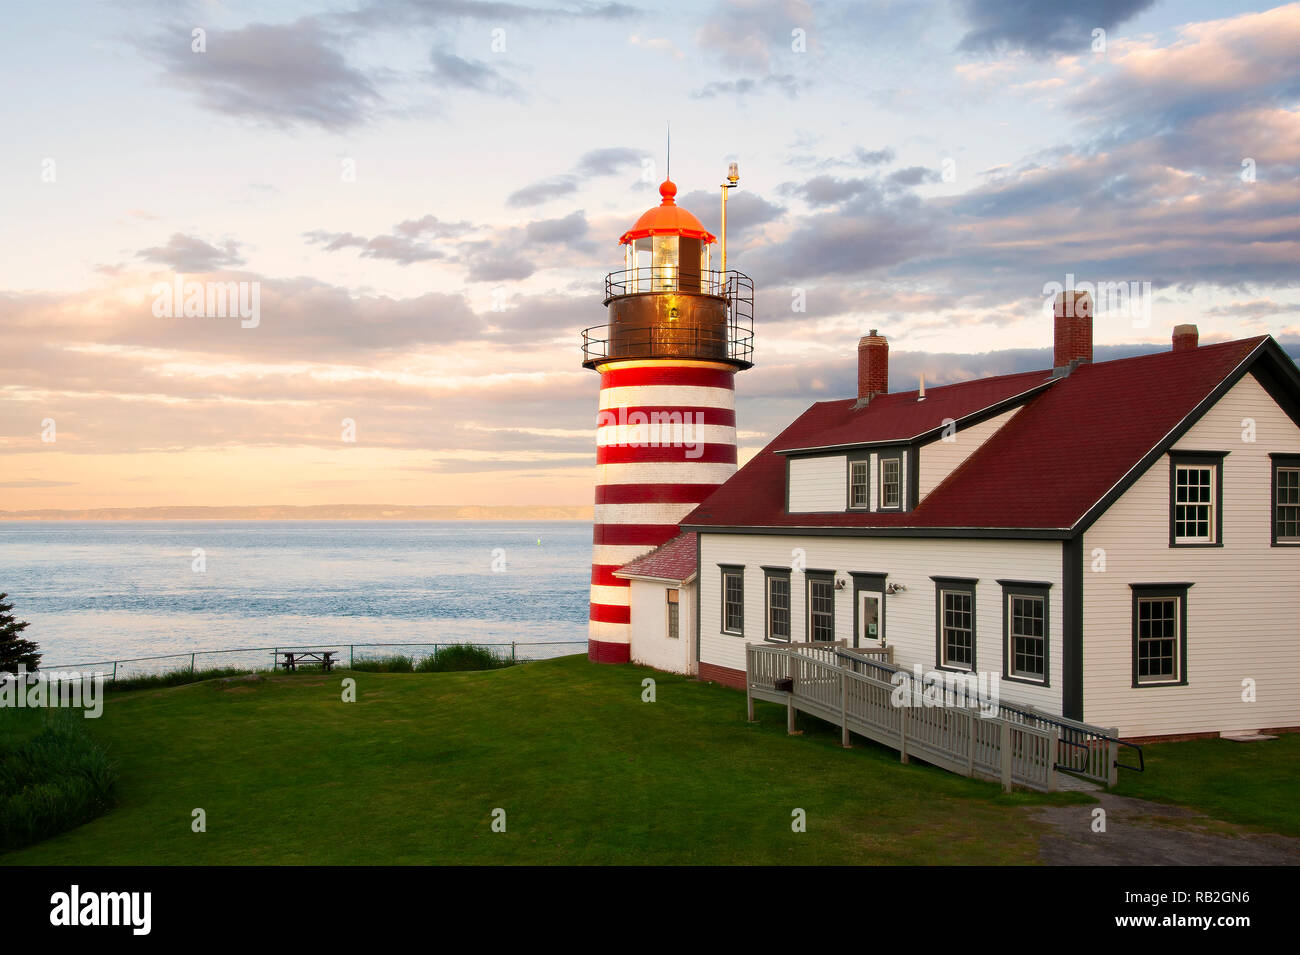 Sunset by West Quoddy Head lighthouse, with its red and white stripes, referred to as the “candy cane” lighthouse, in down east Maine, in New England. Stock Photo